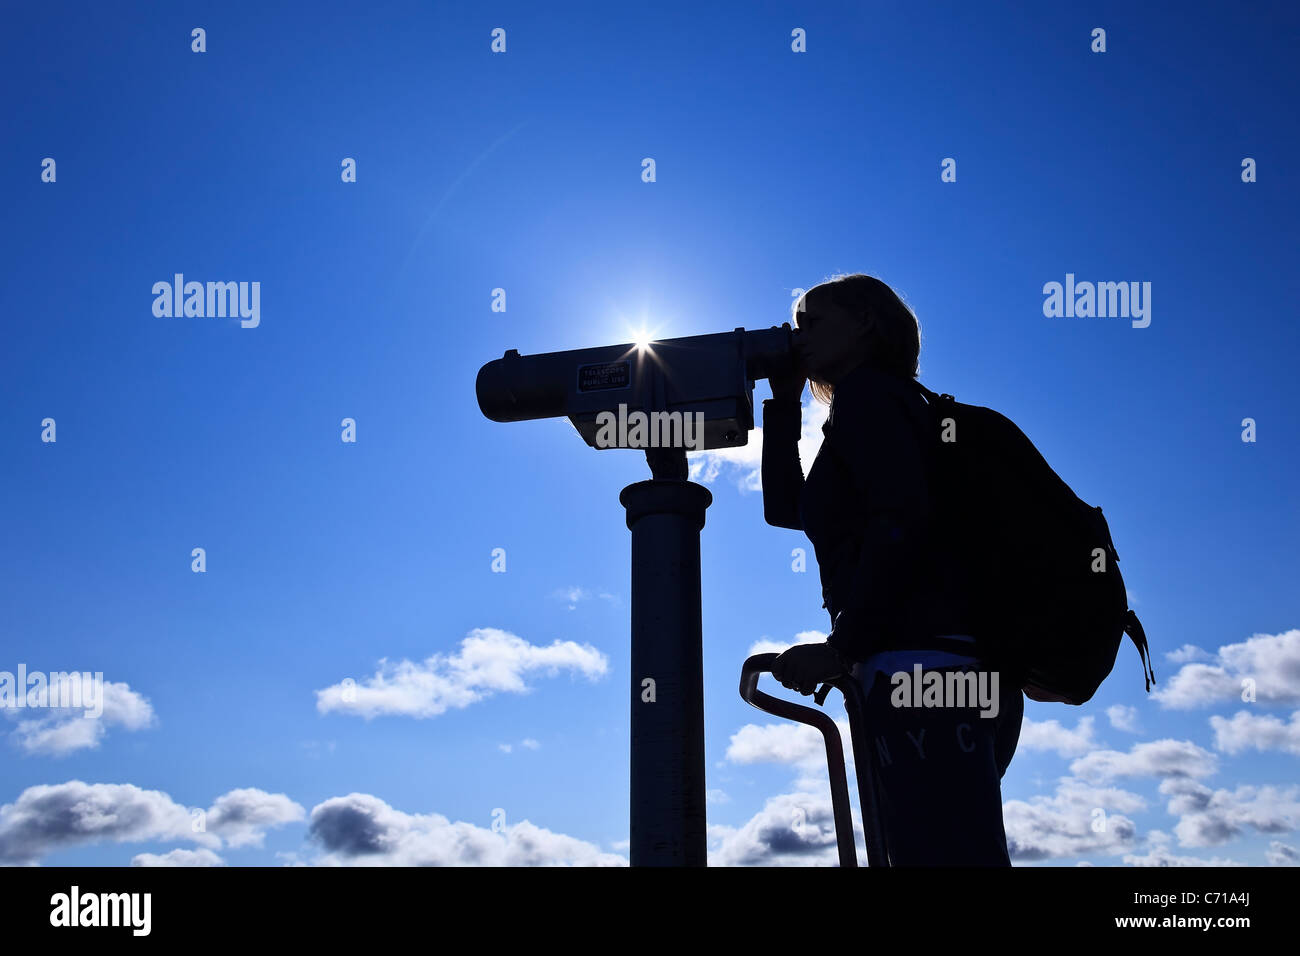 Woman looking through telescope, silhouette. Banque D'Images